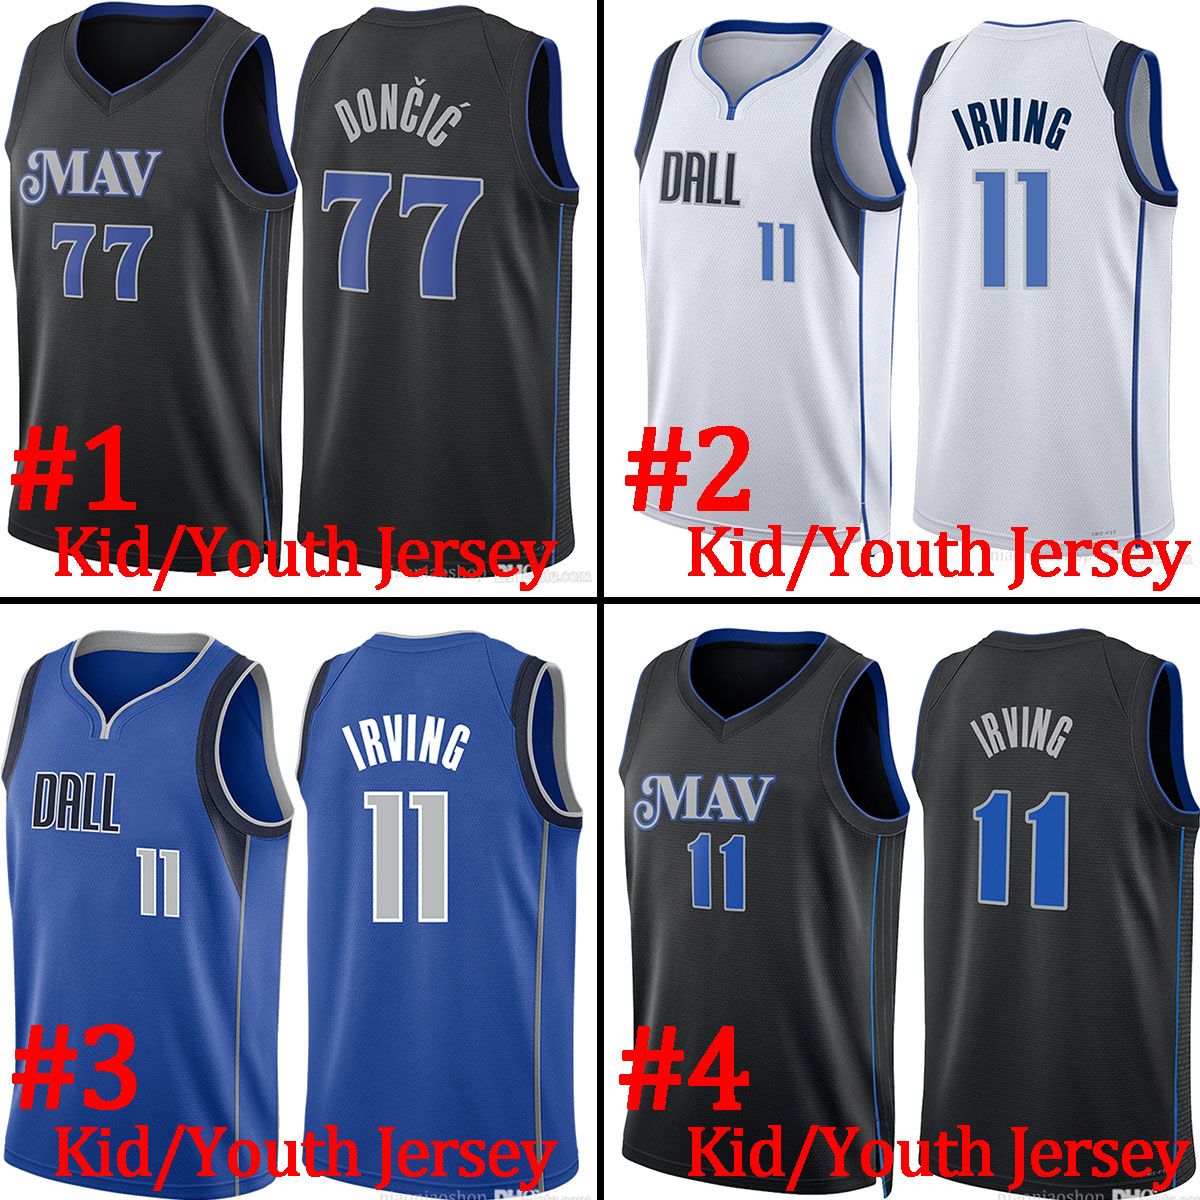 Youth/kid Jersey6